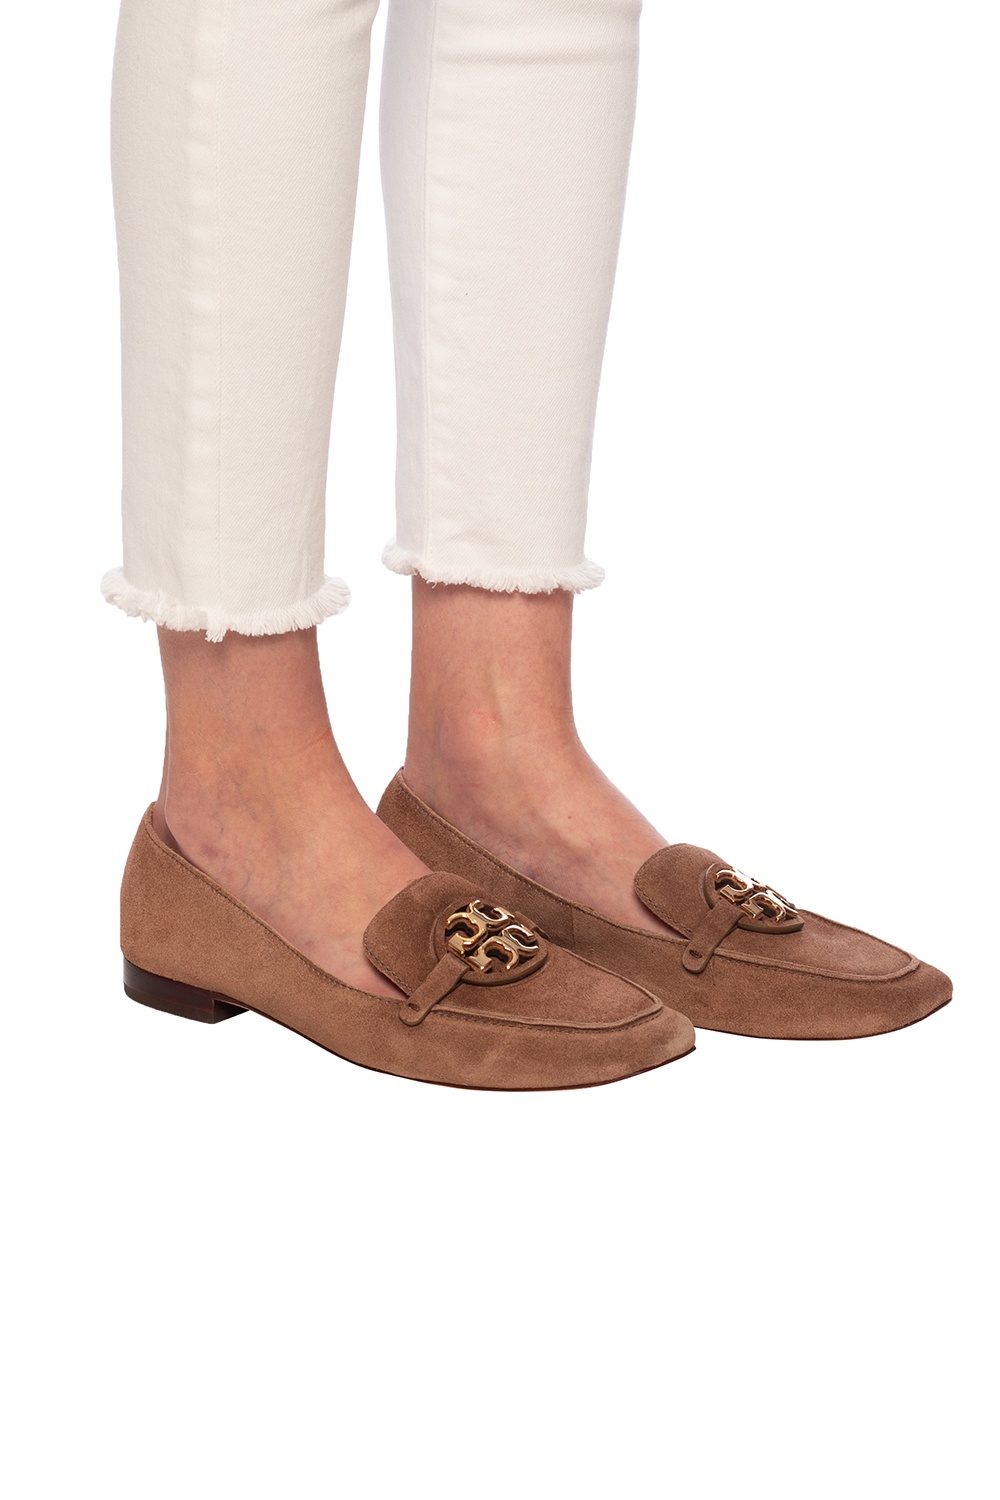 Tory Burch Suede loafers | Women's Shoes | Vitkac